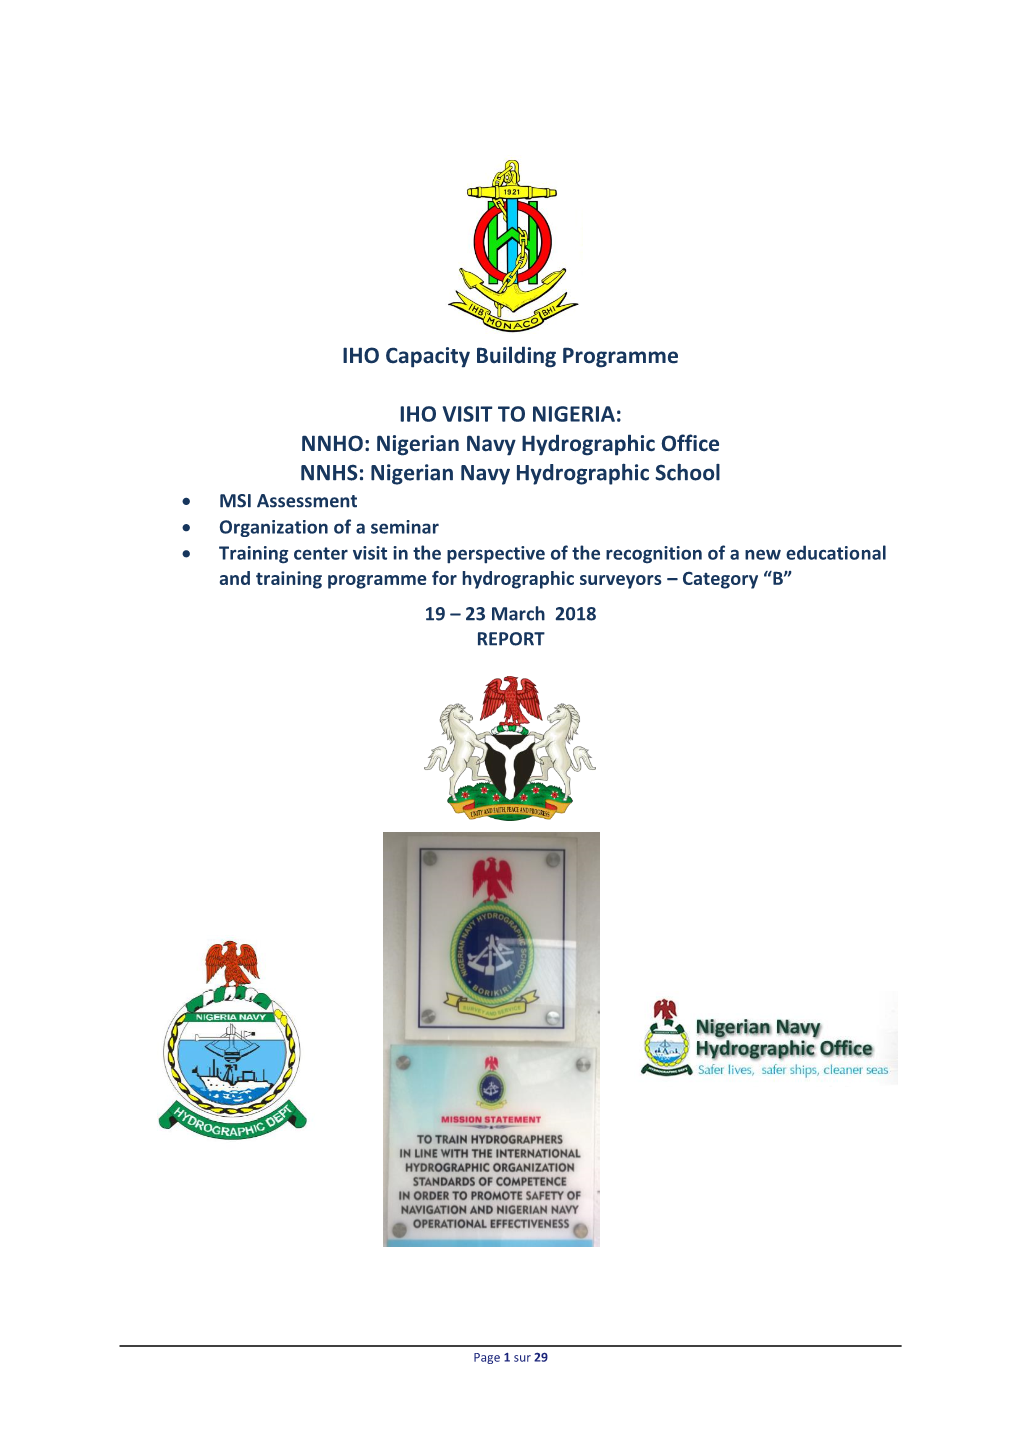 NNHO: Nigerian Navy Hydrographic Office NNHS